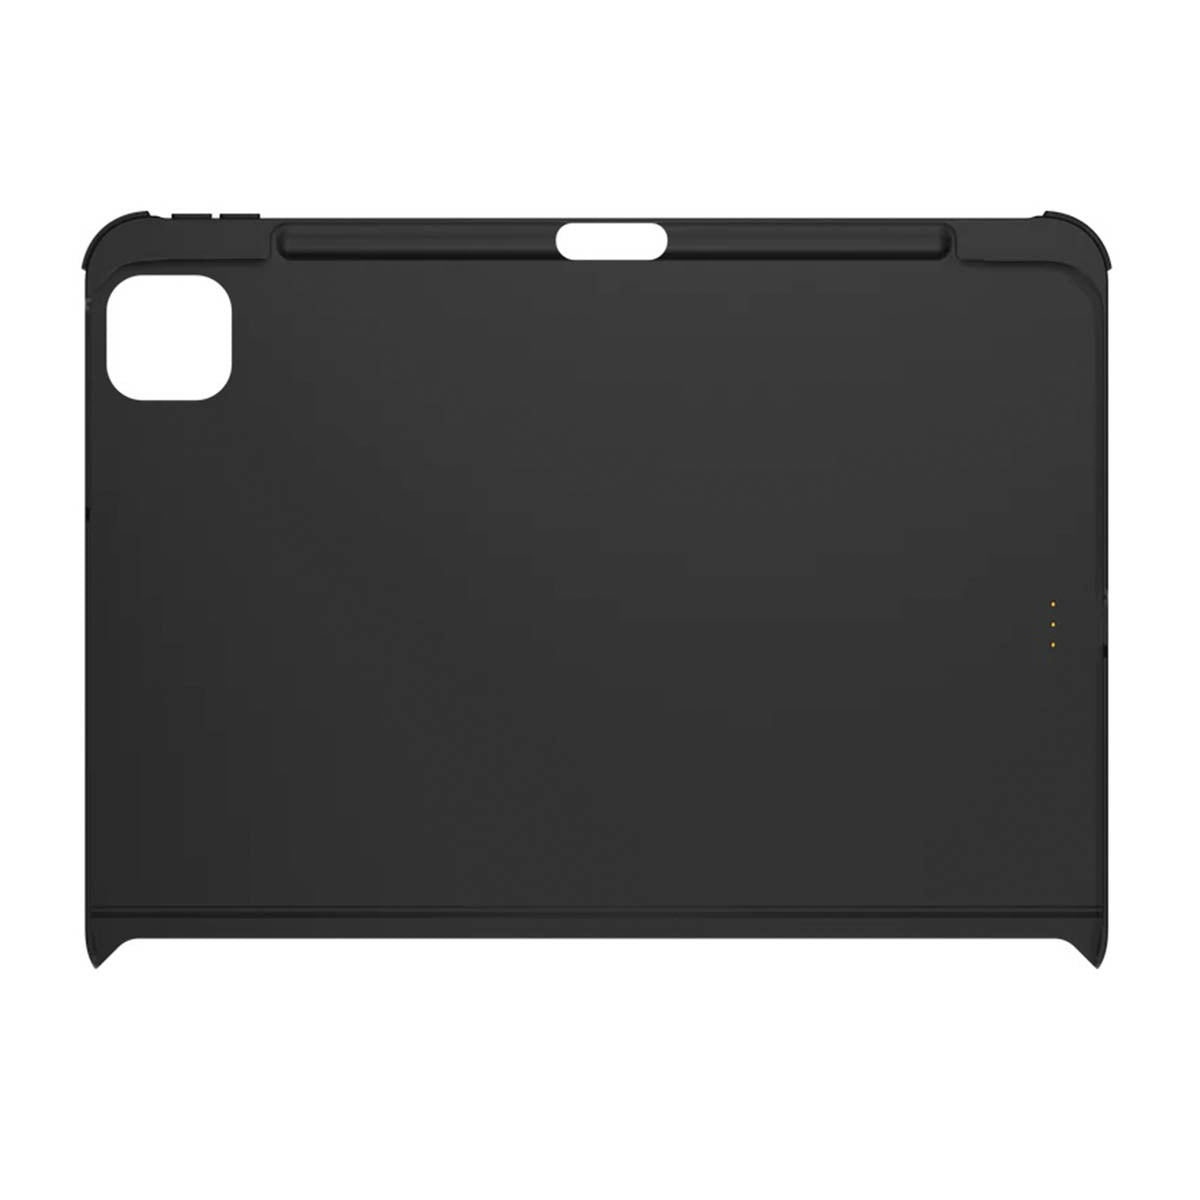 MagEasy CITICOVER Magnetic Protective Case for iPad Pro 11″ &amp; iPad Air 10.9″ / iPad Pro 12.9″ (Leather Black)